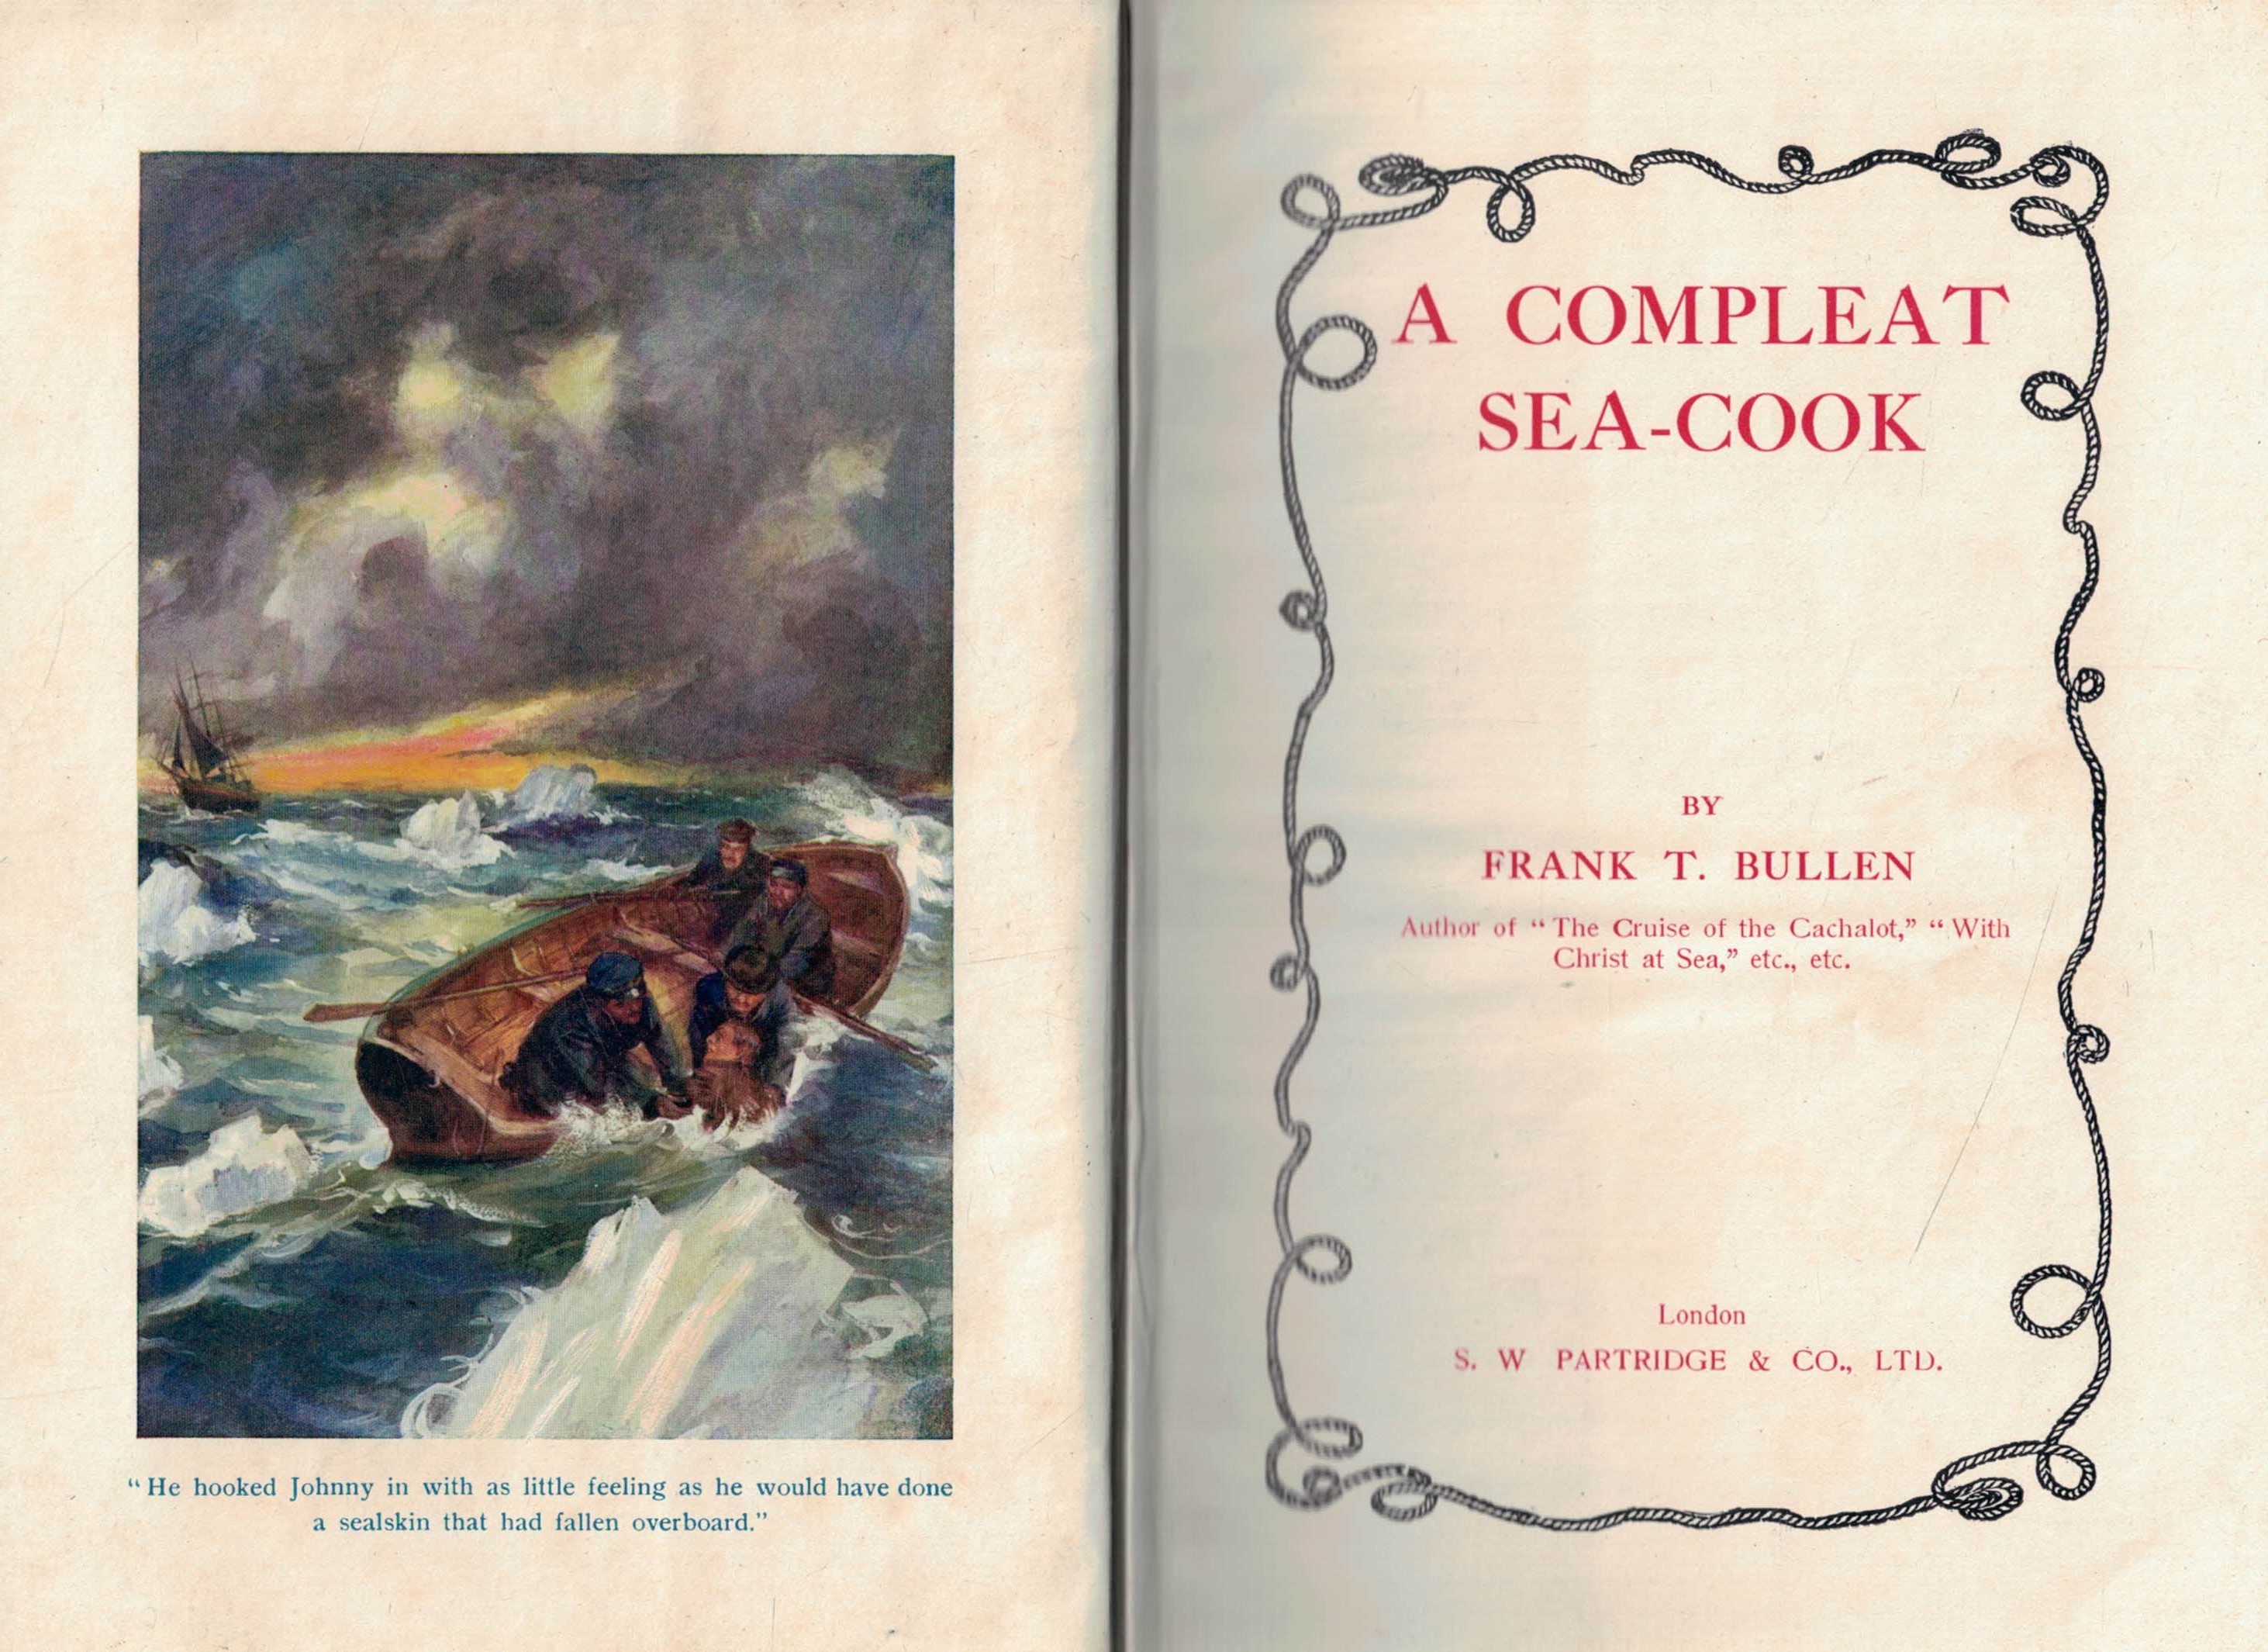 A Compleat Sea-Cook